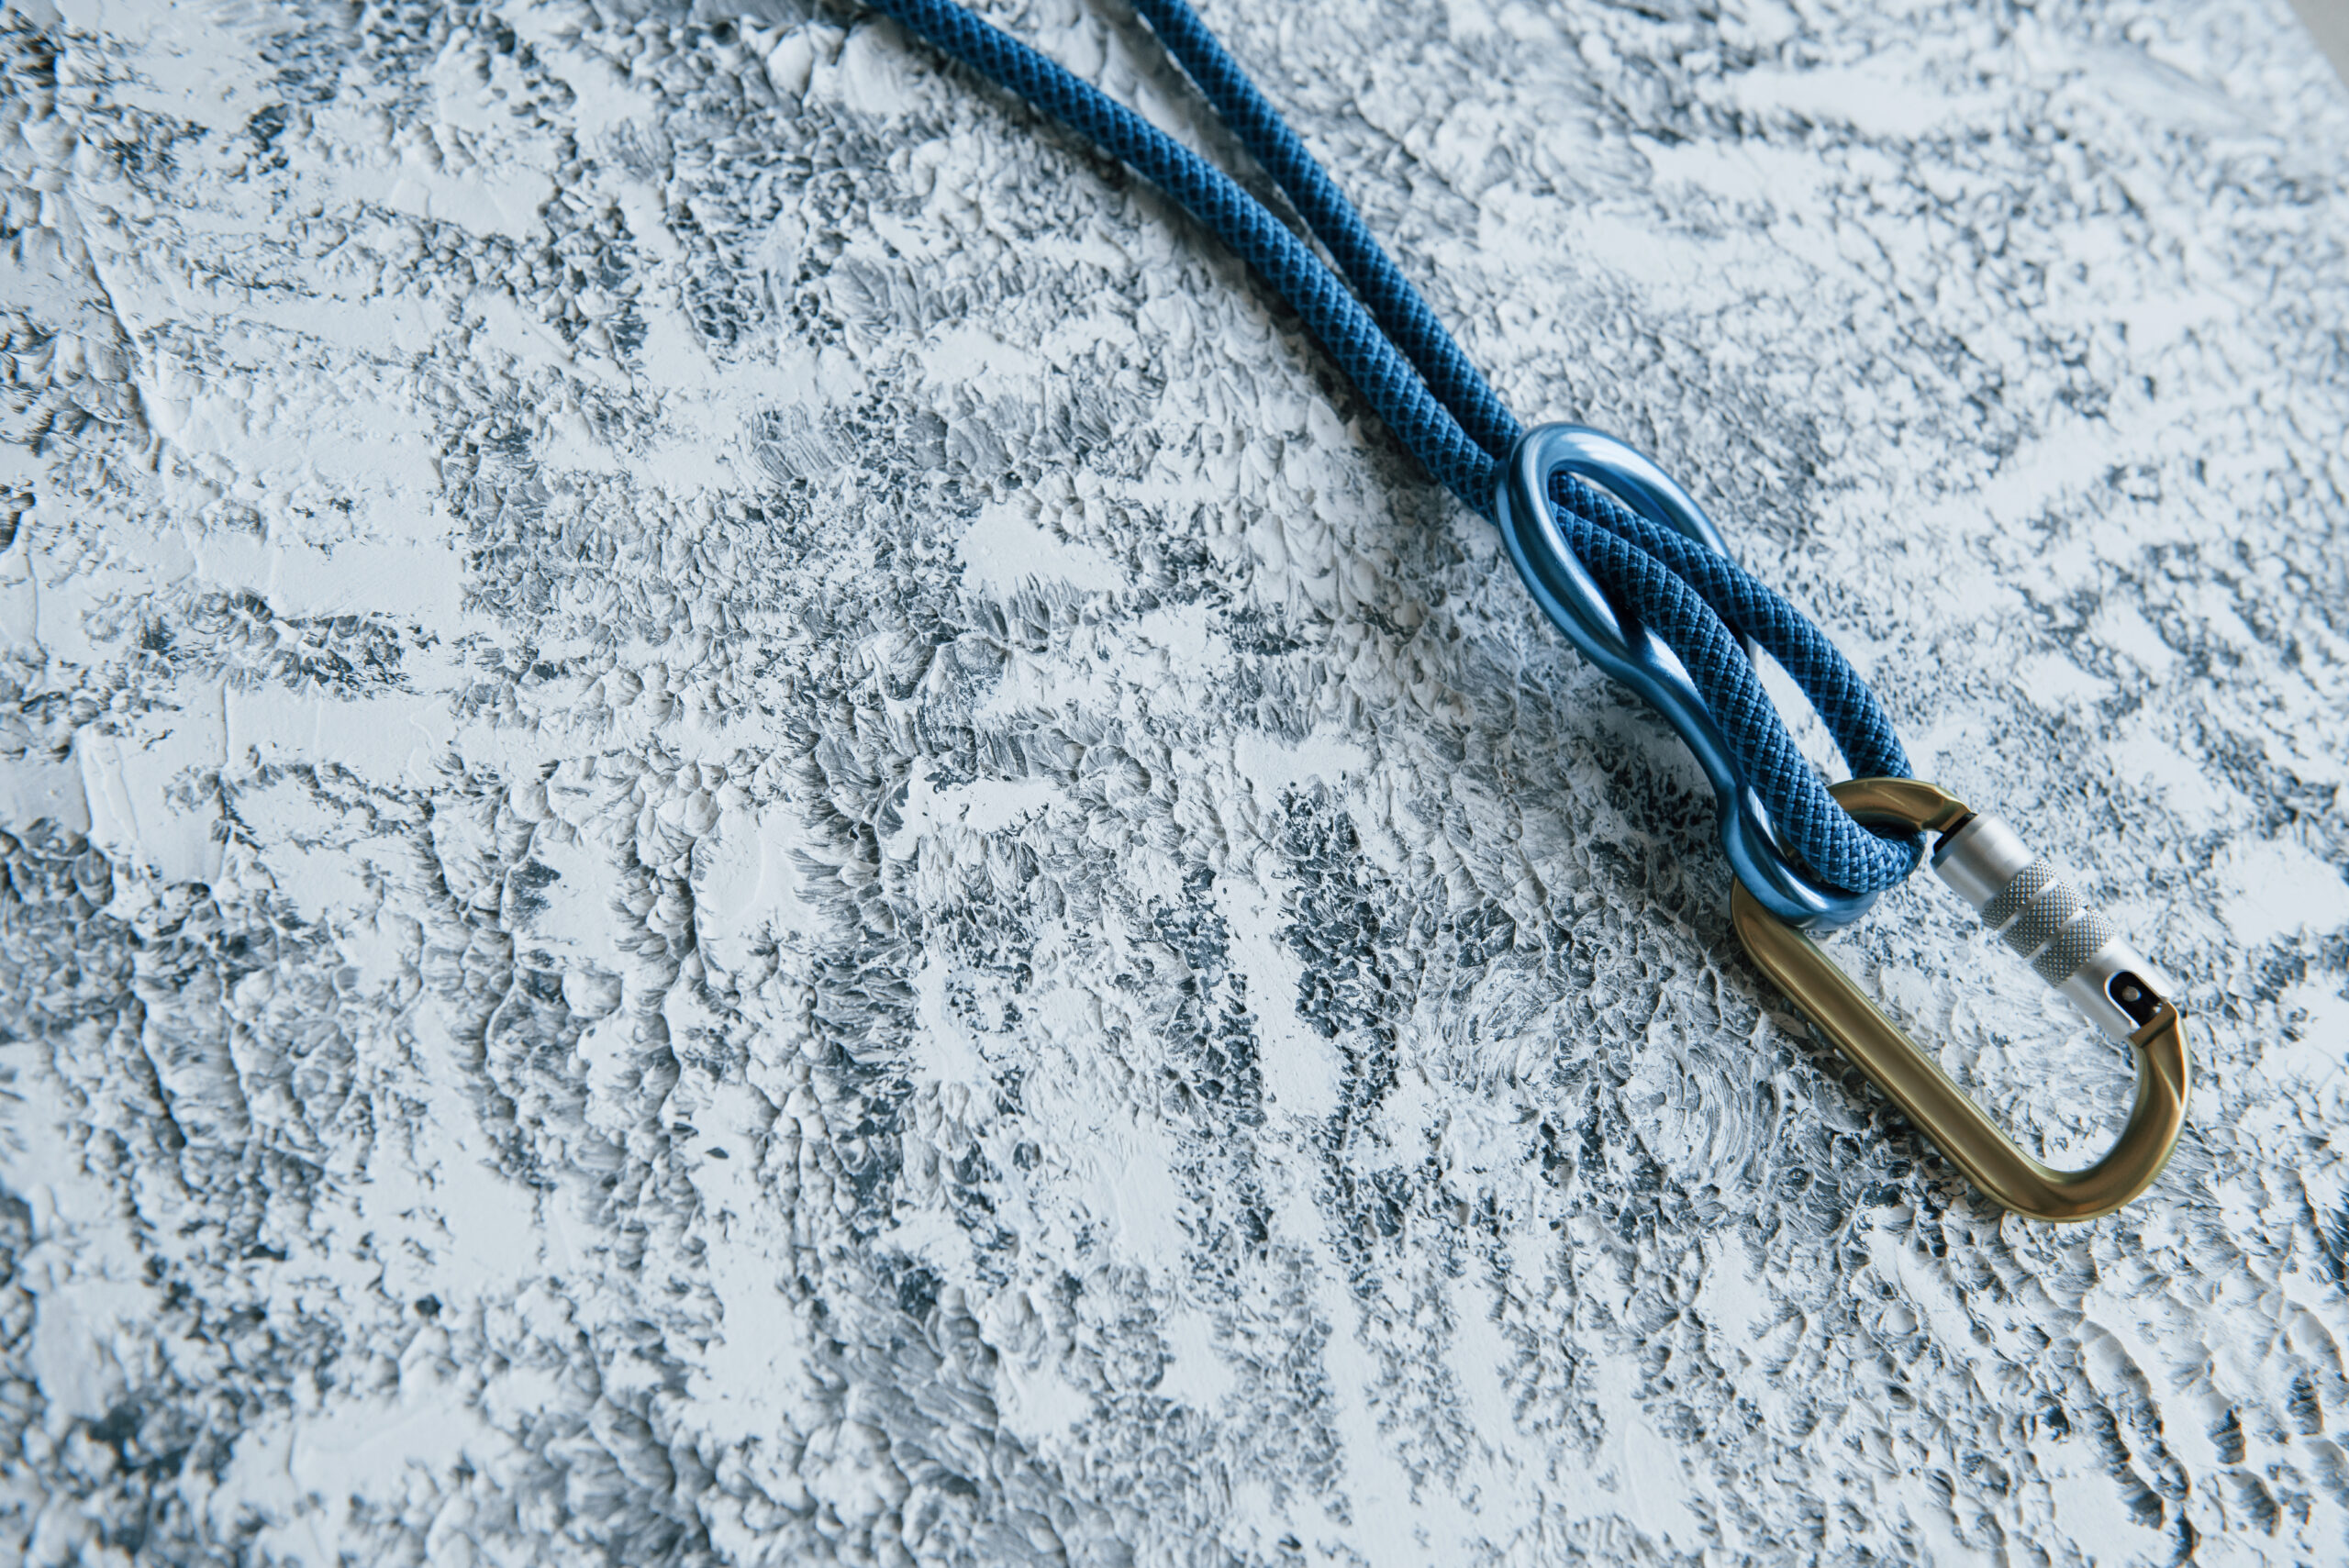 A close-up photo of a single rope used for rappelling, highlighting the wear and tear that can occur and emphasizing the importance of careful inspection and maintenance to prevent rope failure.